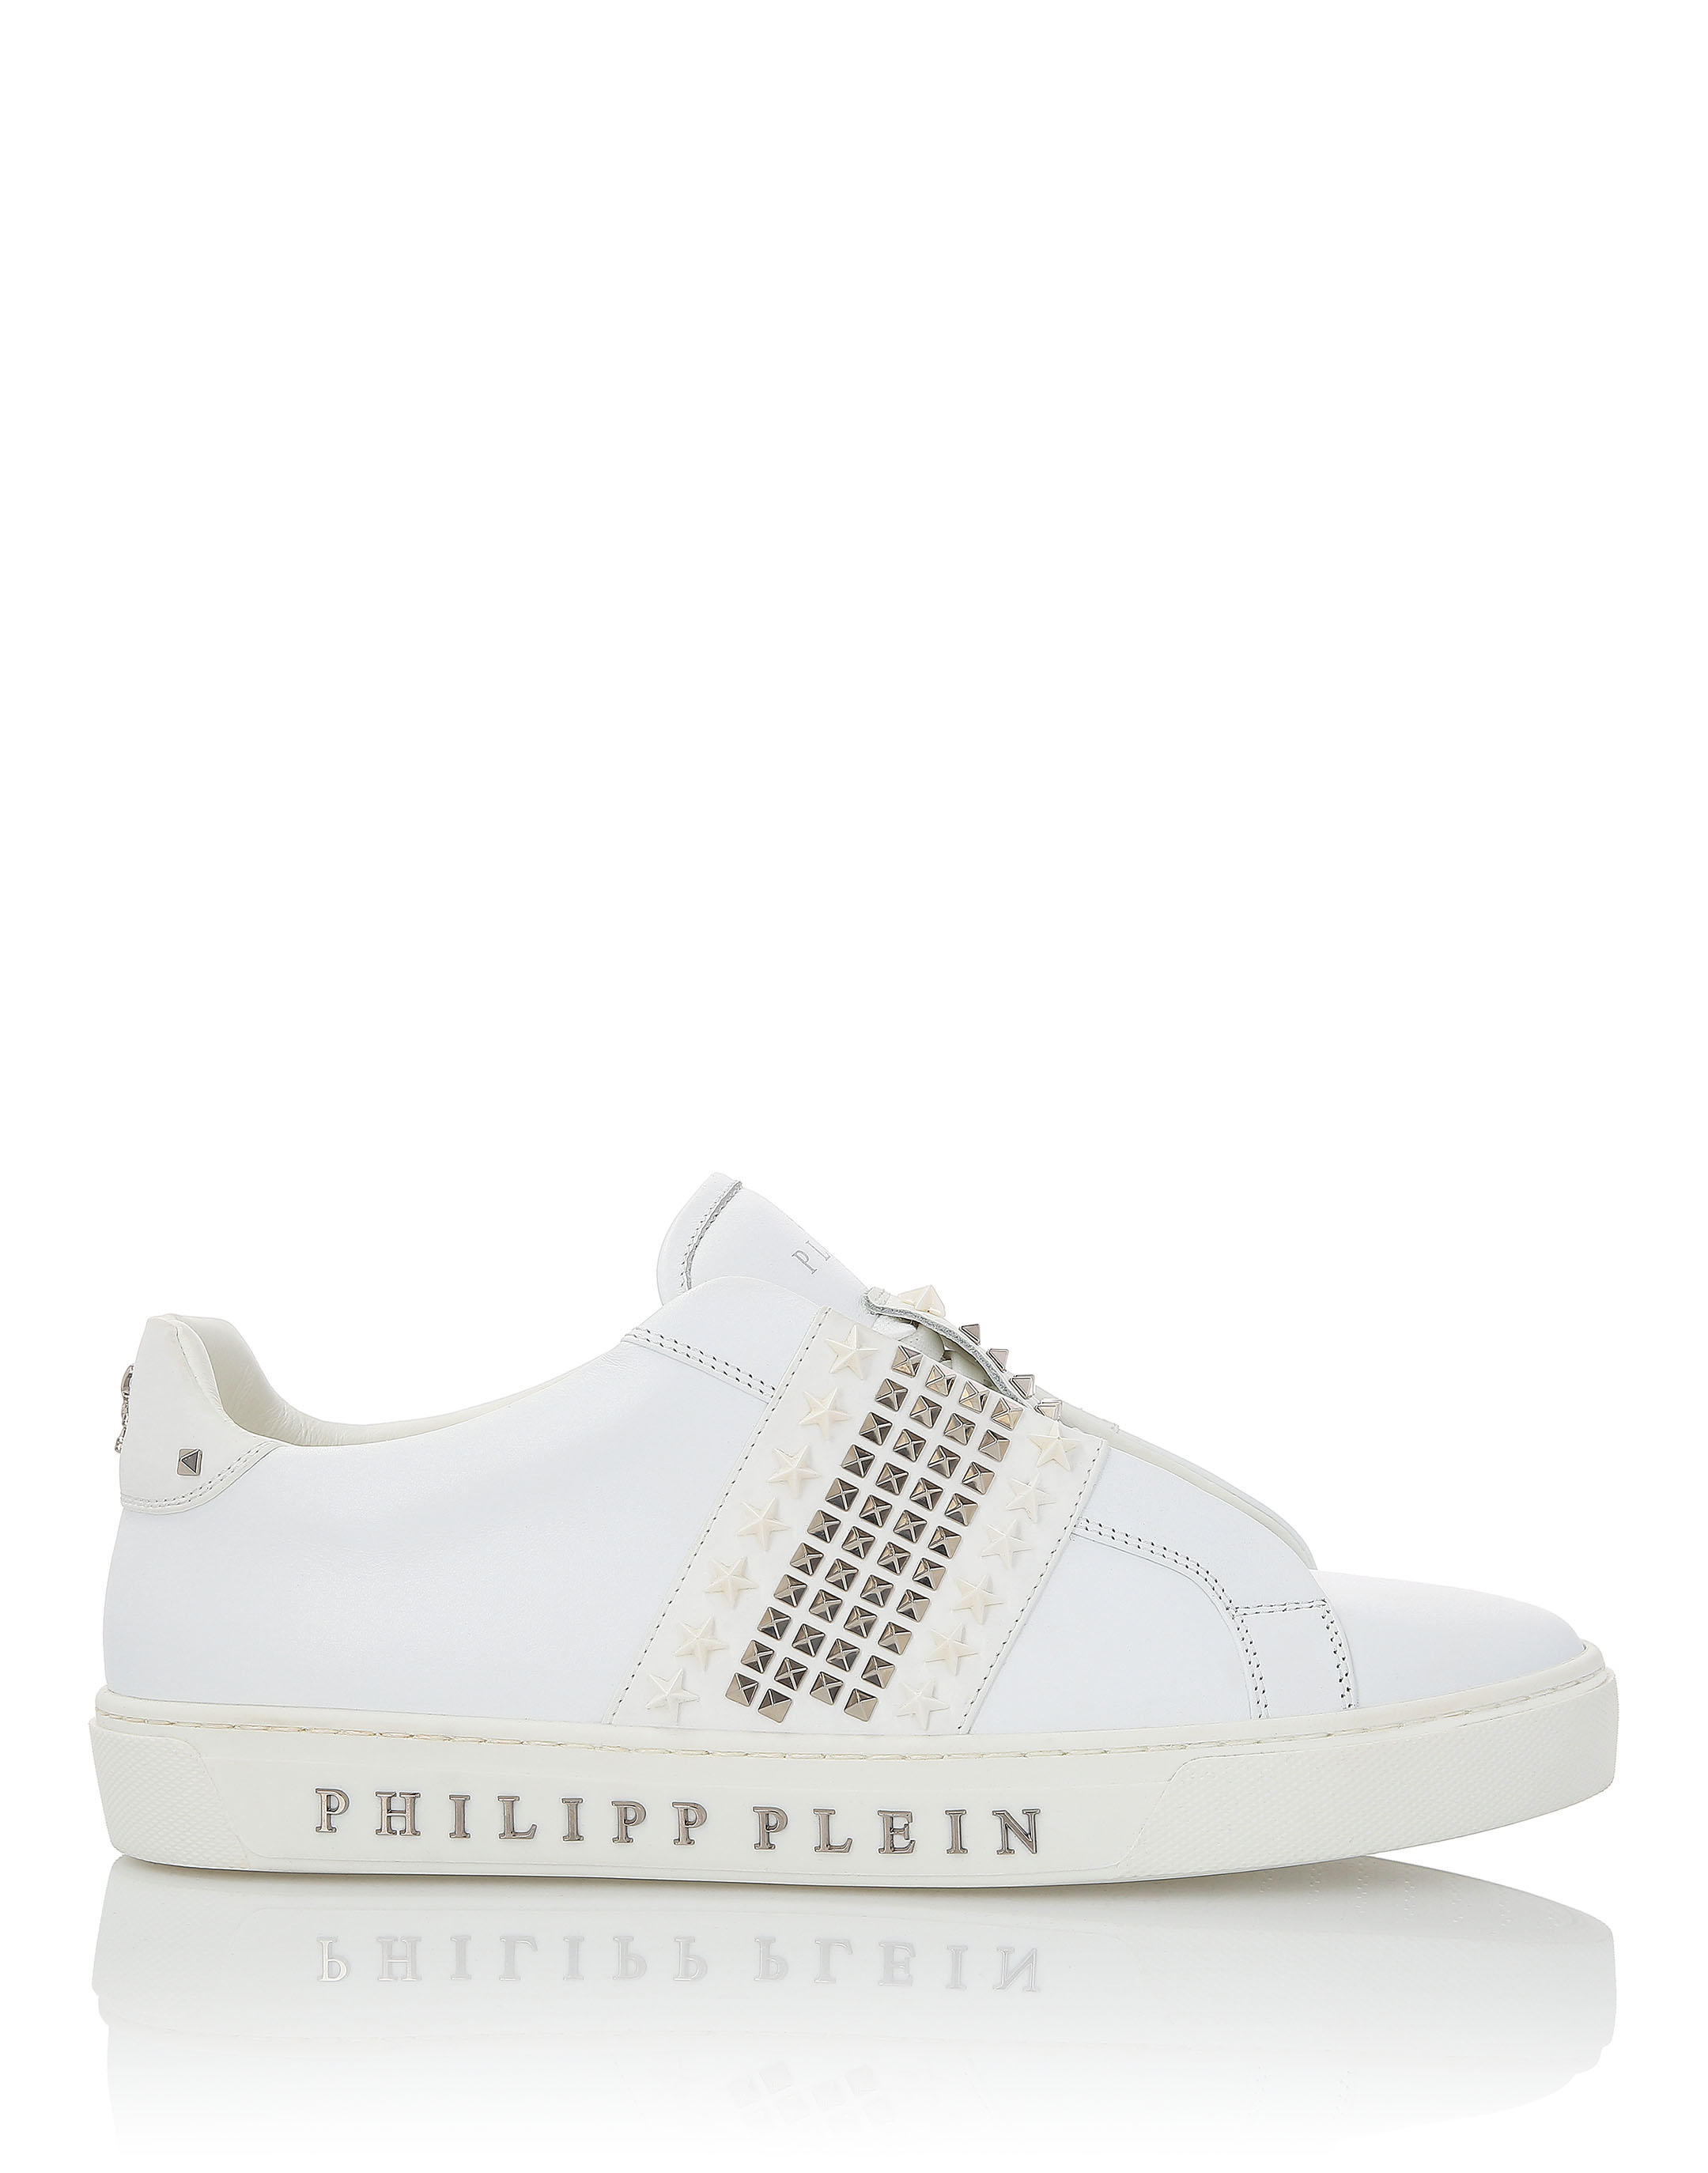 Lo-Top Sneakers "Bryant" | Philipp Plein Outlet